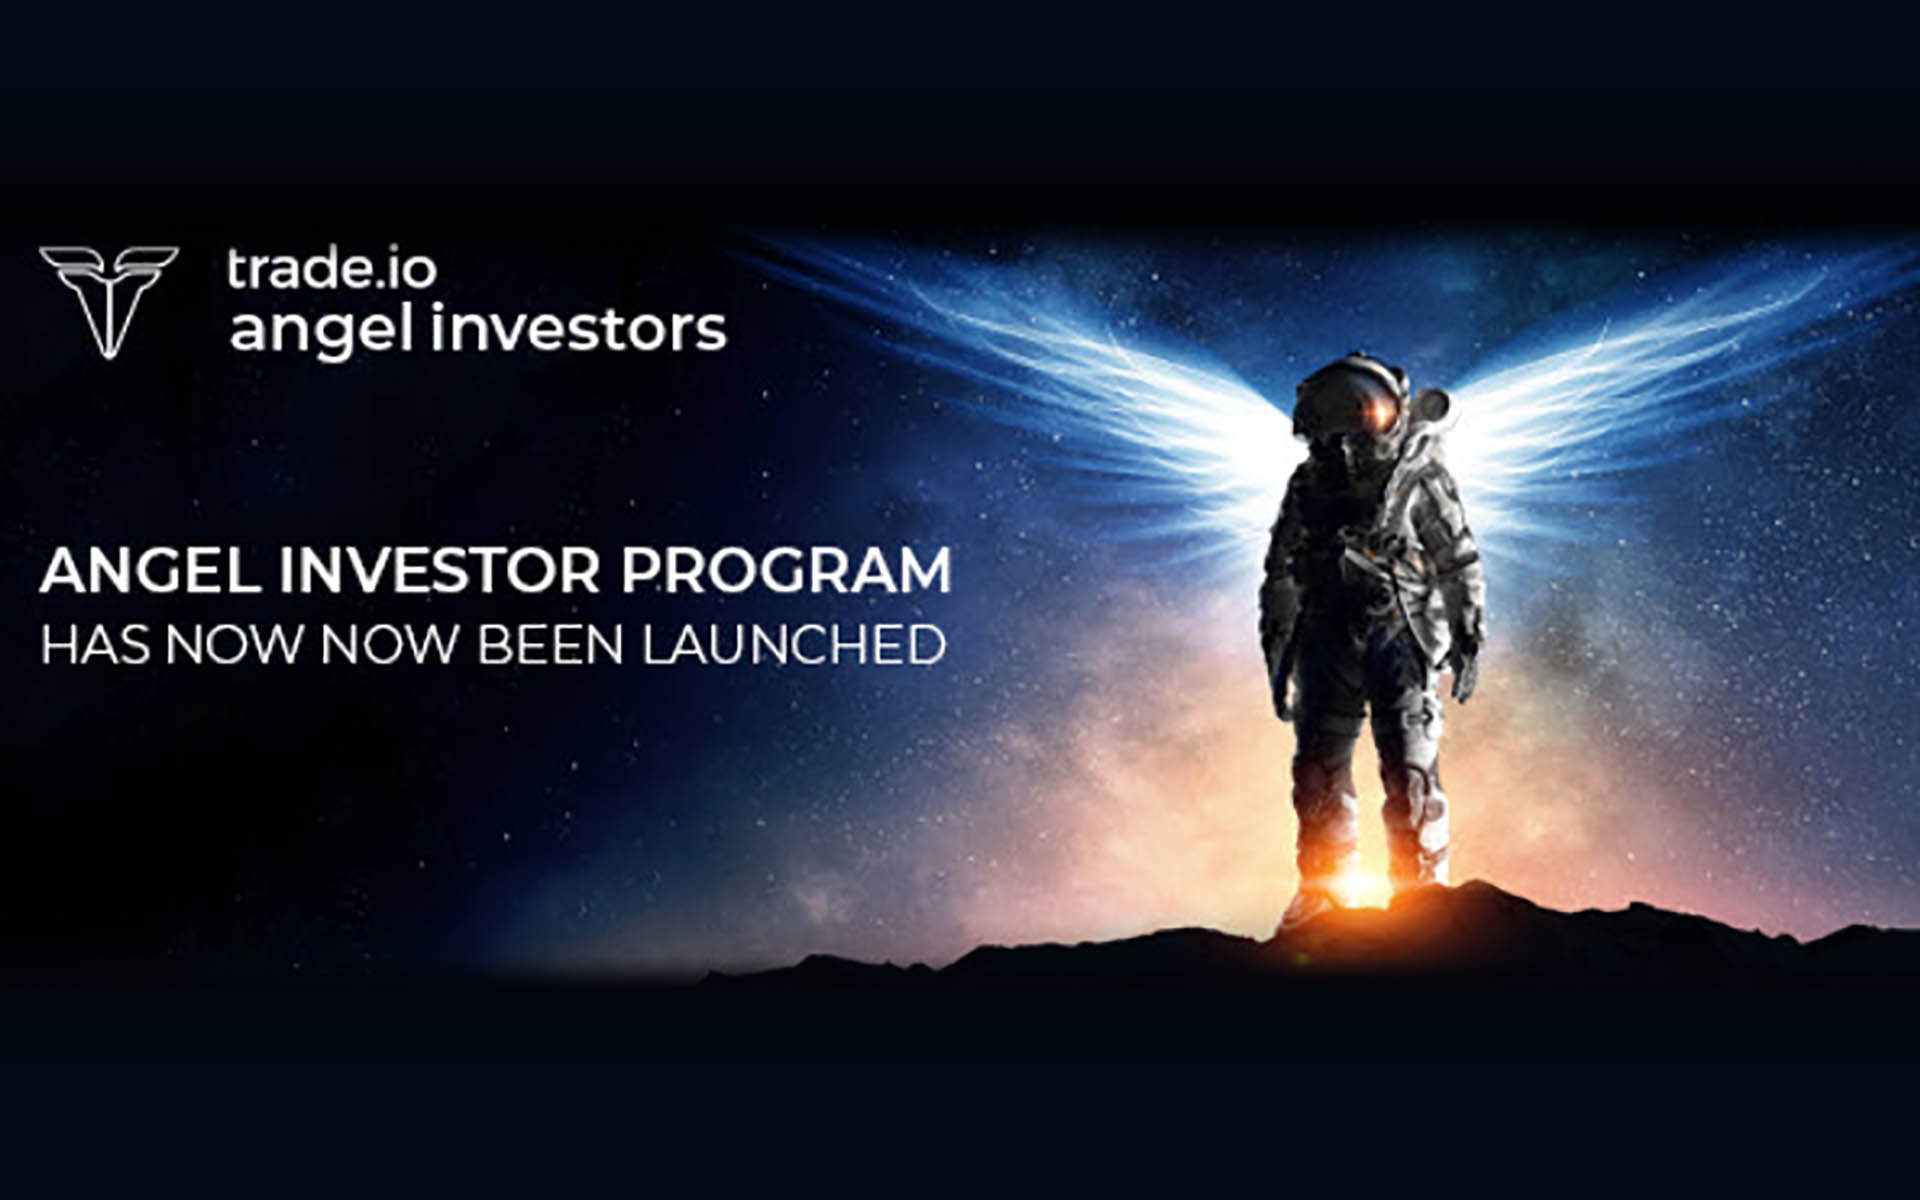 trade.io Launches Angel Investor Program & Has Over 300 Million USD For Potential Investment In trade.io Sponsored ICO Projects